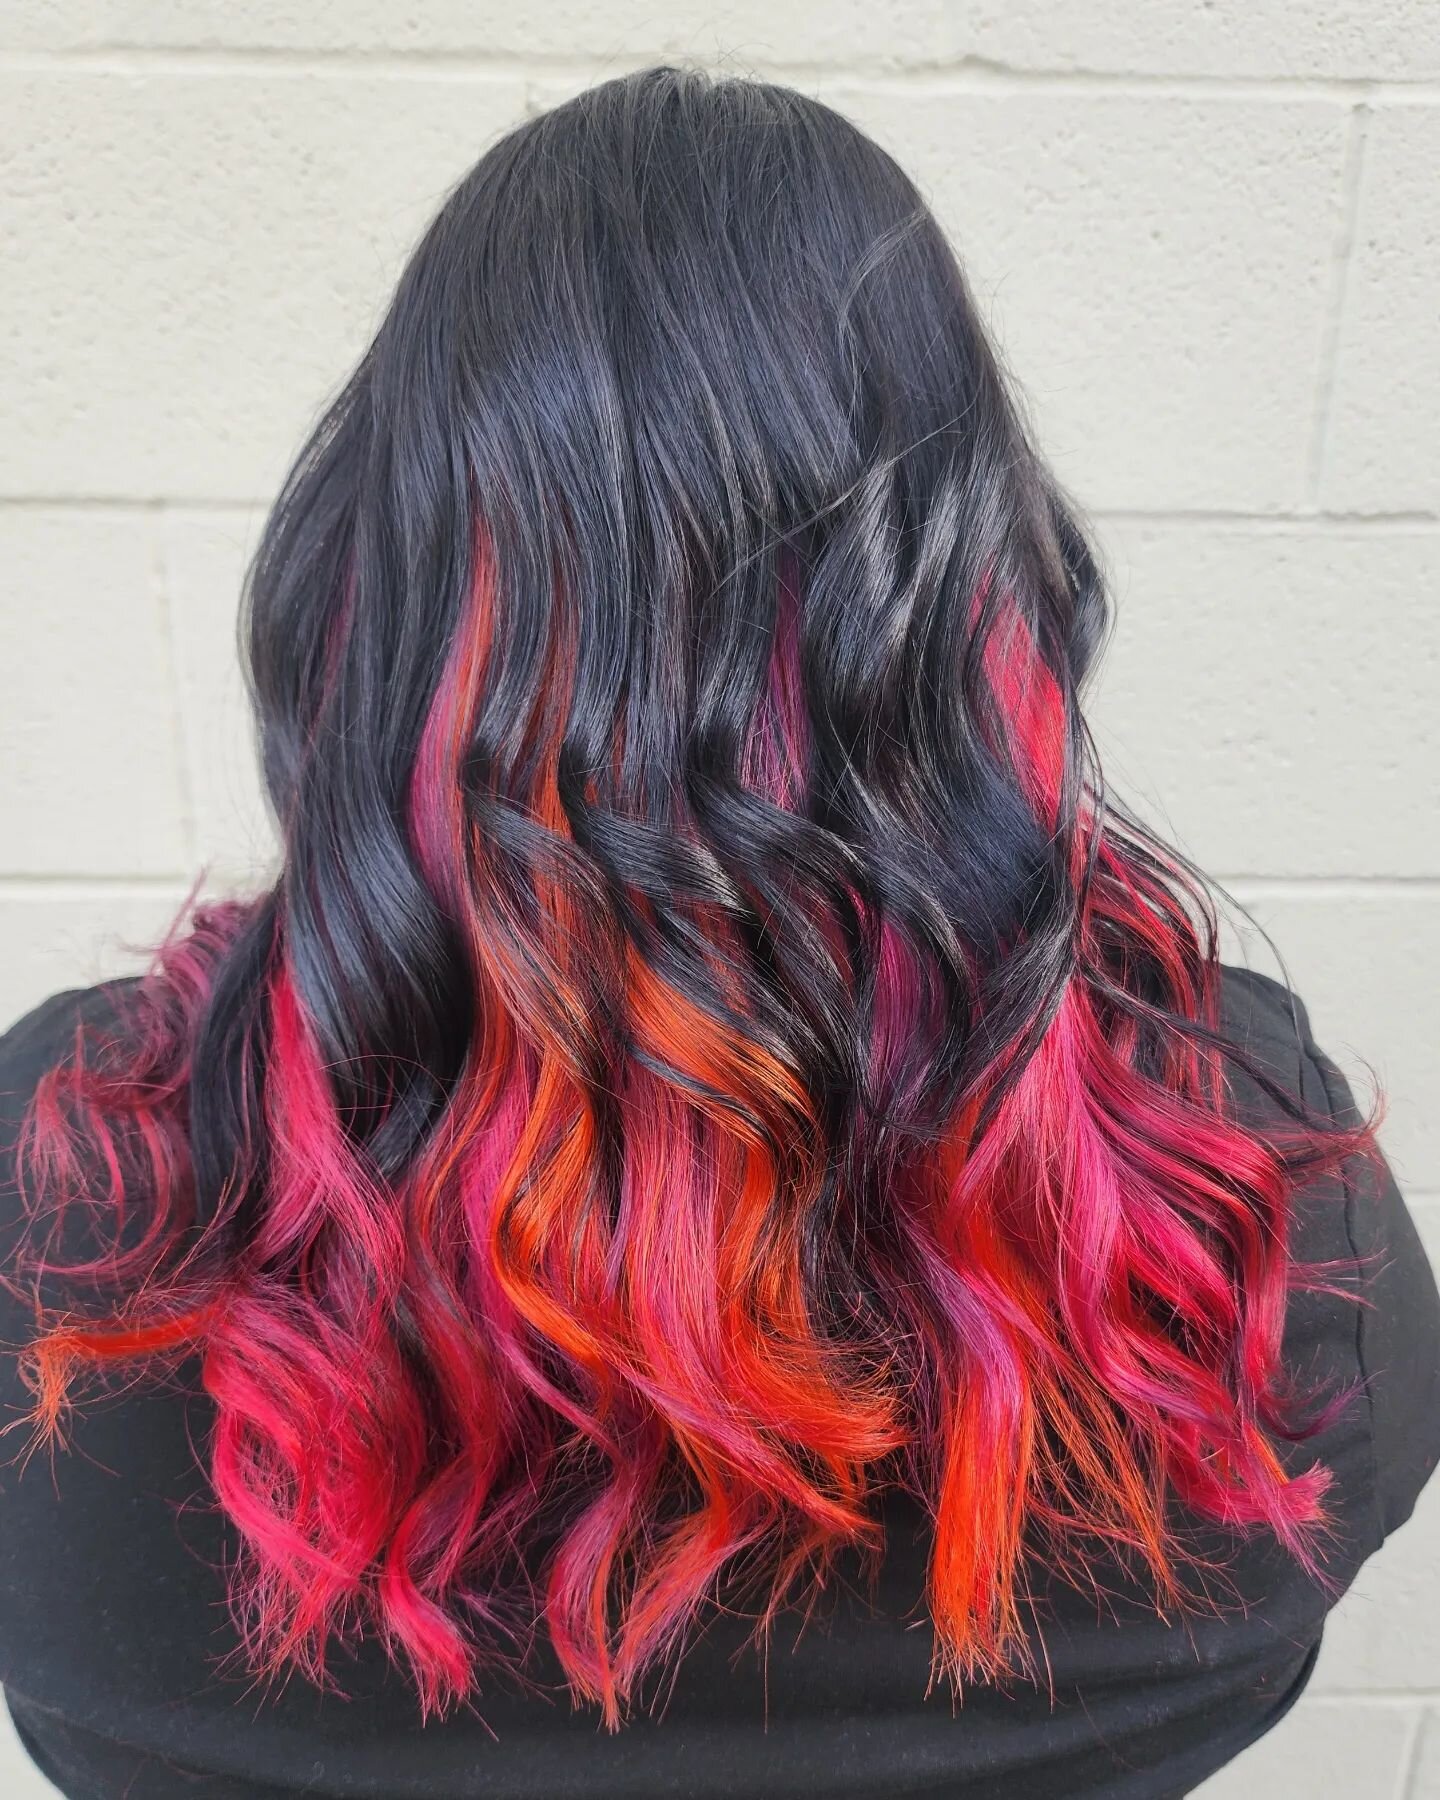 Swipe all the way left to see the before of this beautiful Vivid hair transformation!!😍😍😍

#pulpriothair #redkensalon #wemakeitvivid #vividsalon #linthicum #selfcare #selflove #loveyourhair